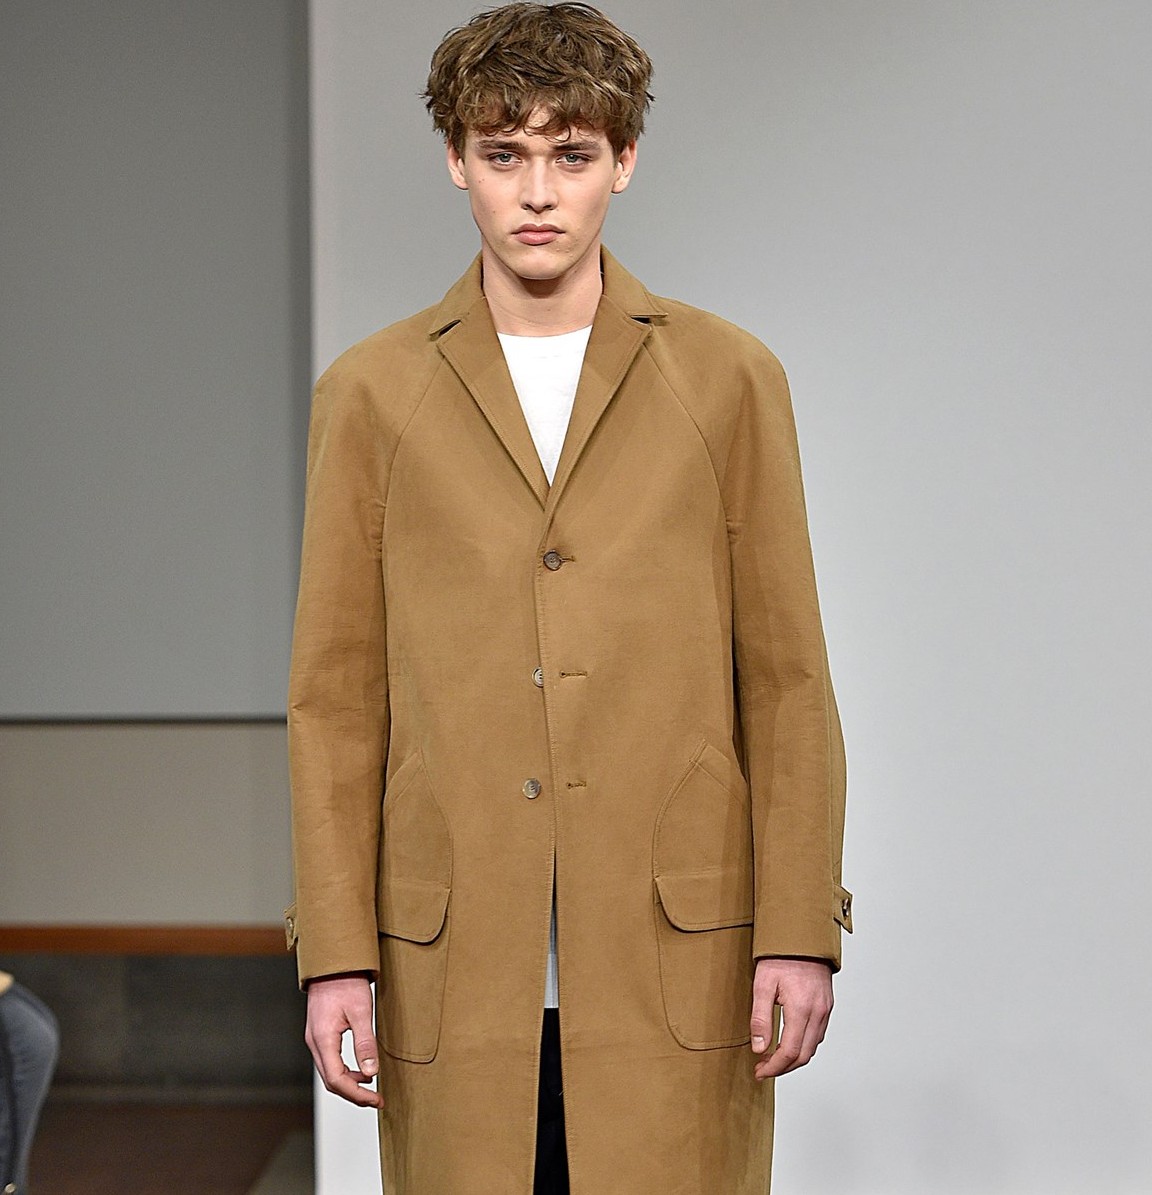 LCM: 1205 Autumn/Winter 2016 Collection